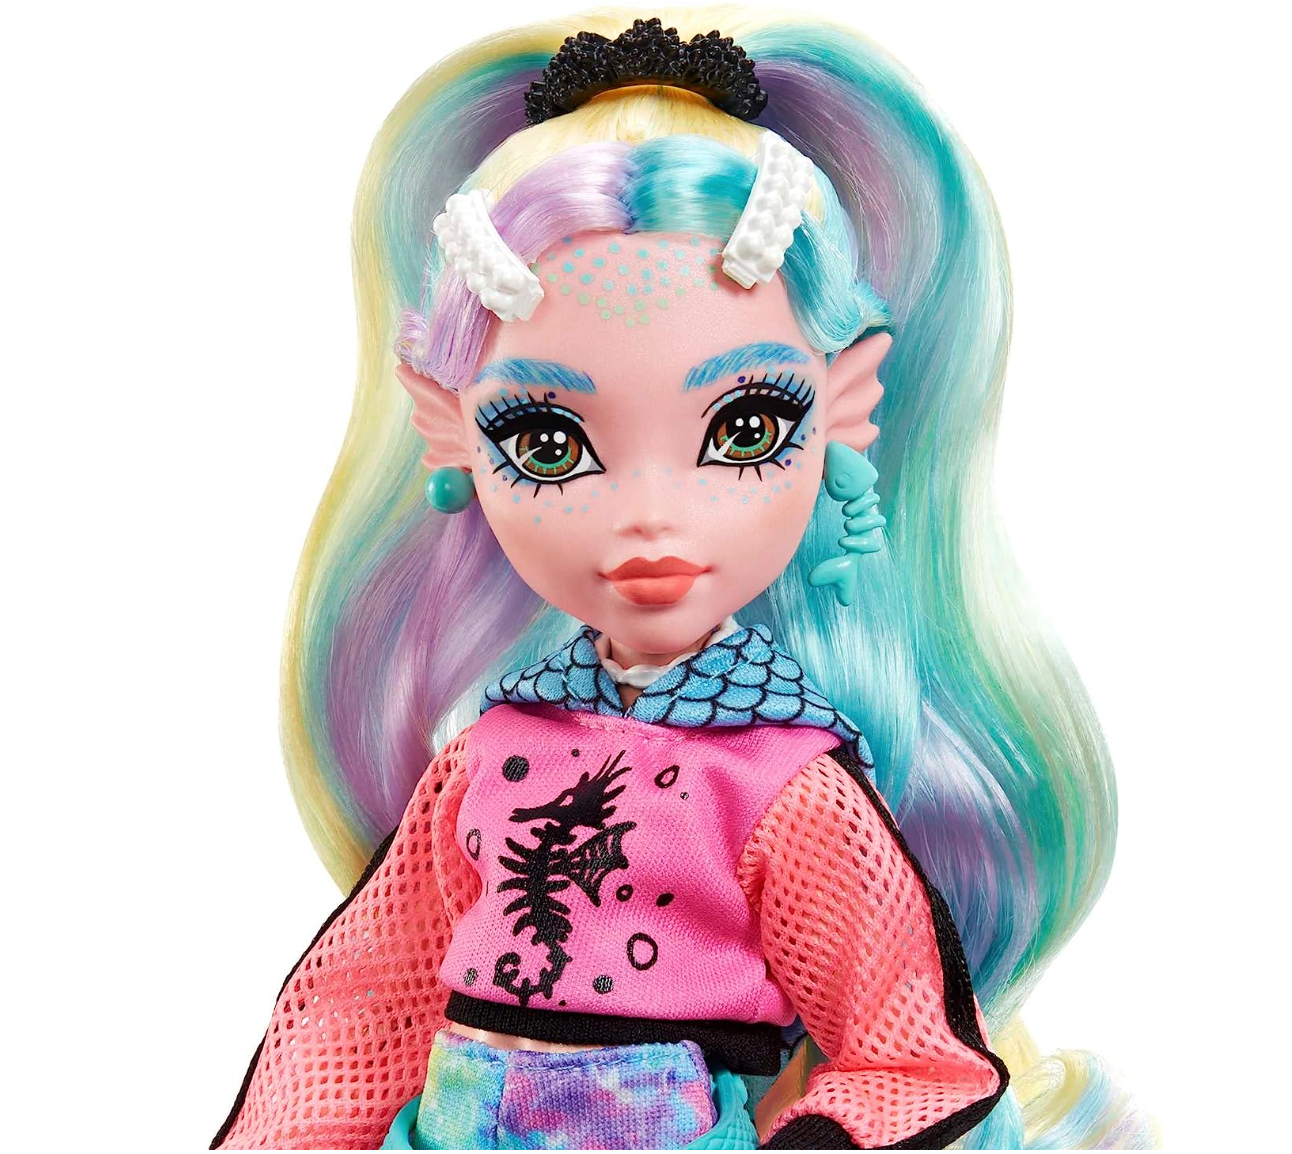 Monster High Lagoona Blue Fashion Doll with Colorful Streaked Hair, Signature Look, Accessories & Pet Piranha